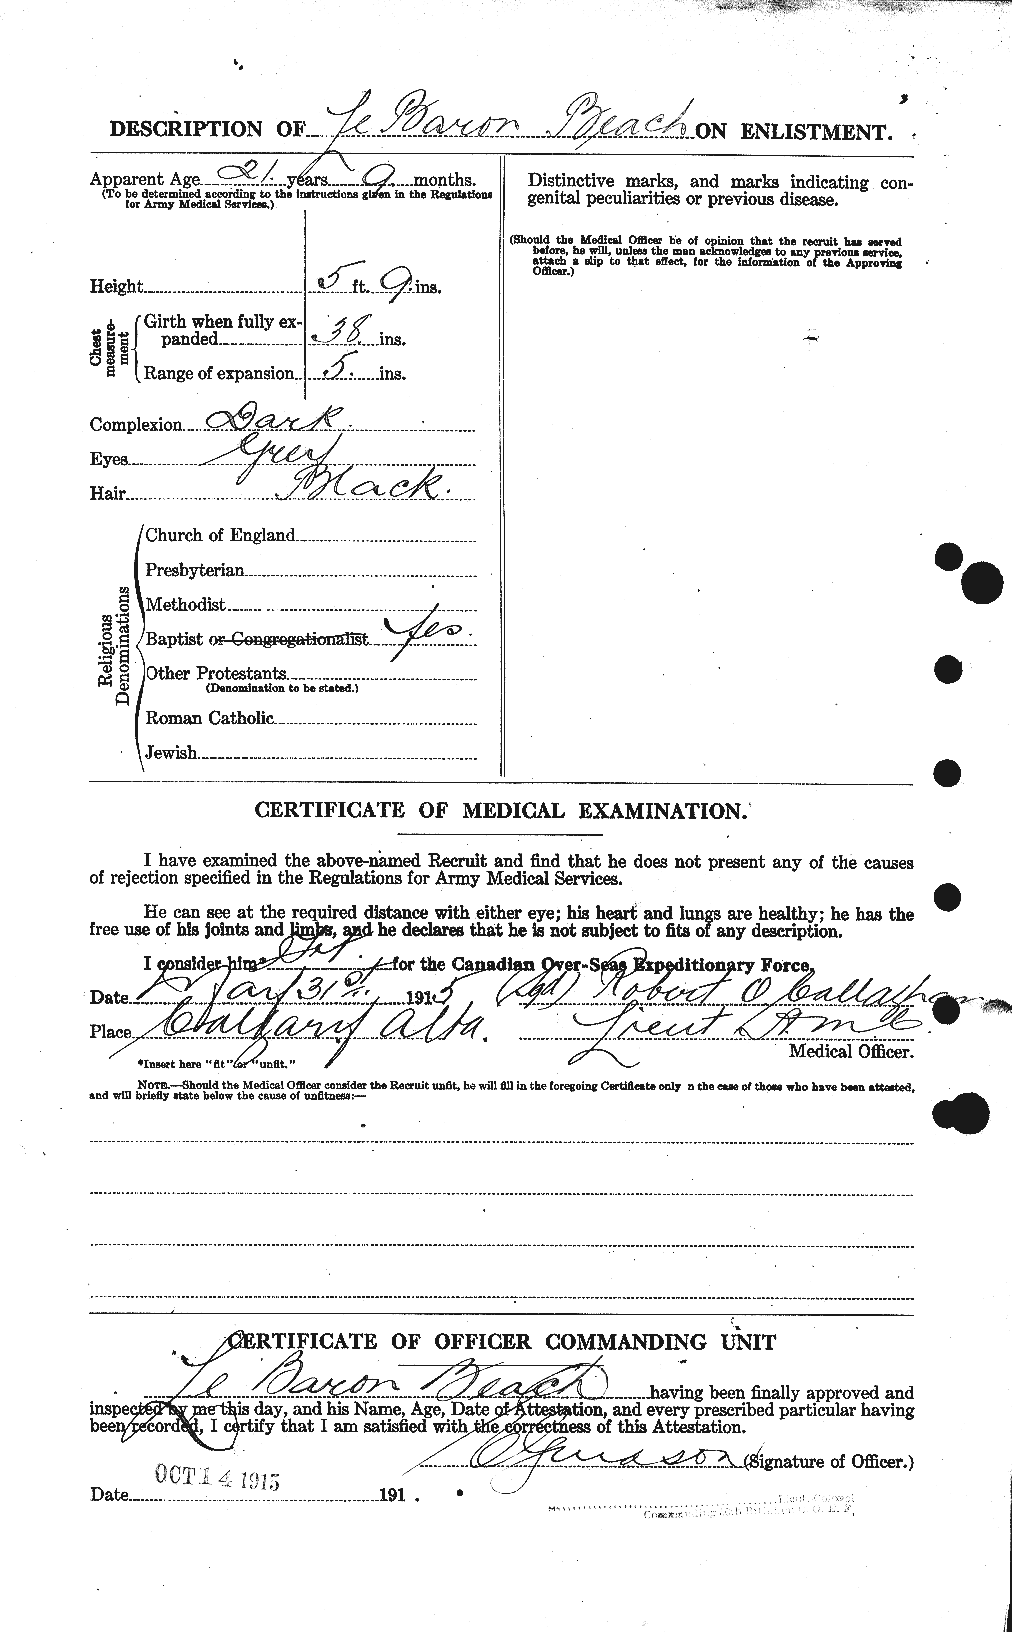 Personnel Records of the First World War - CEF 235124b